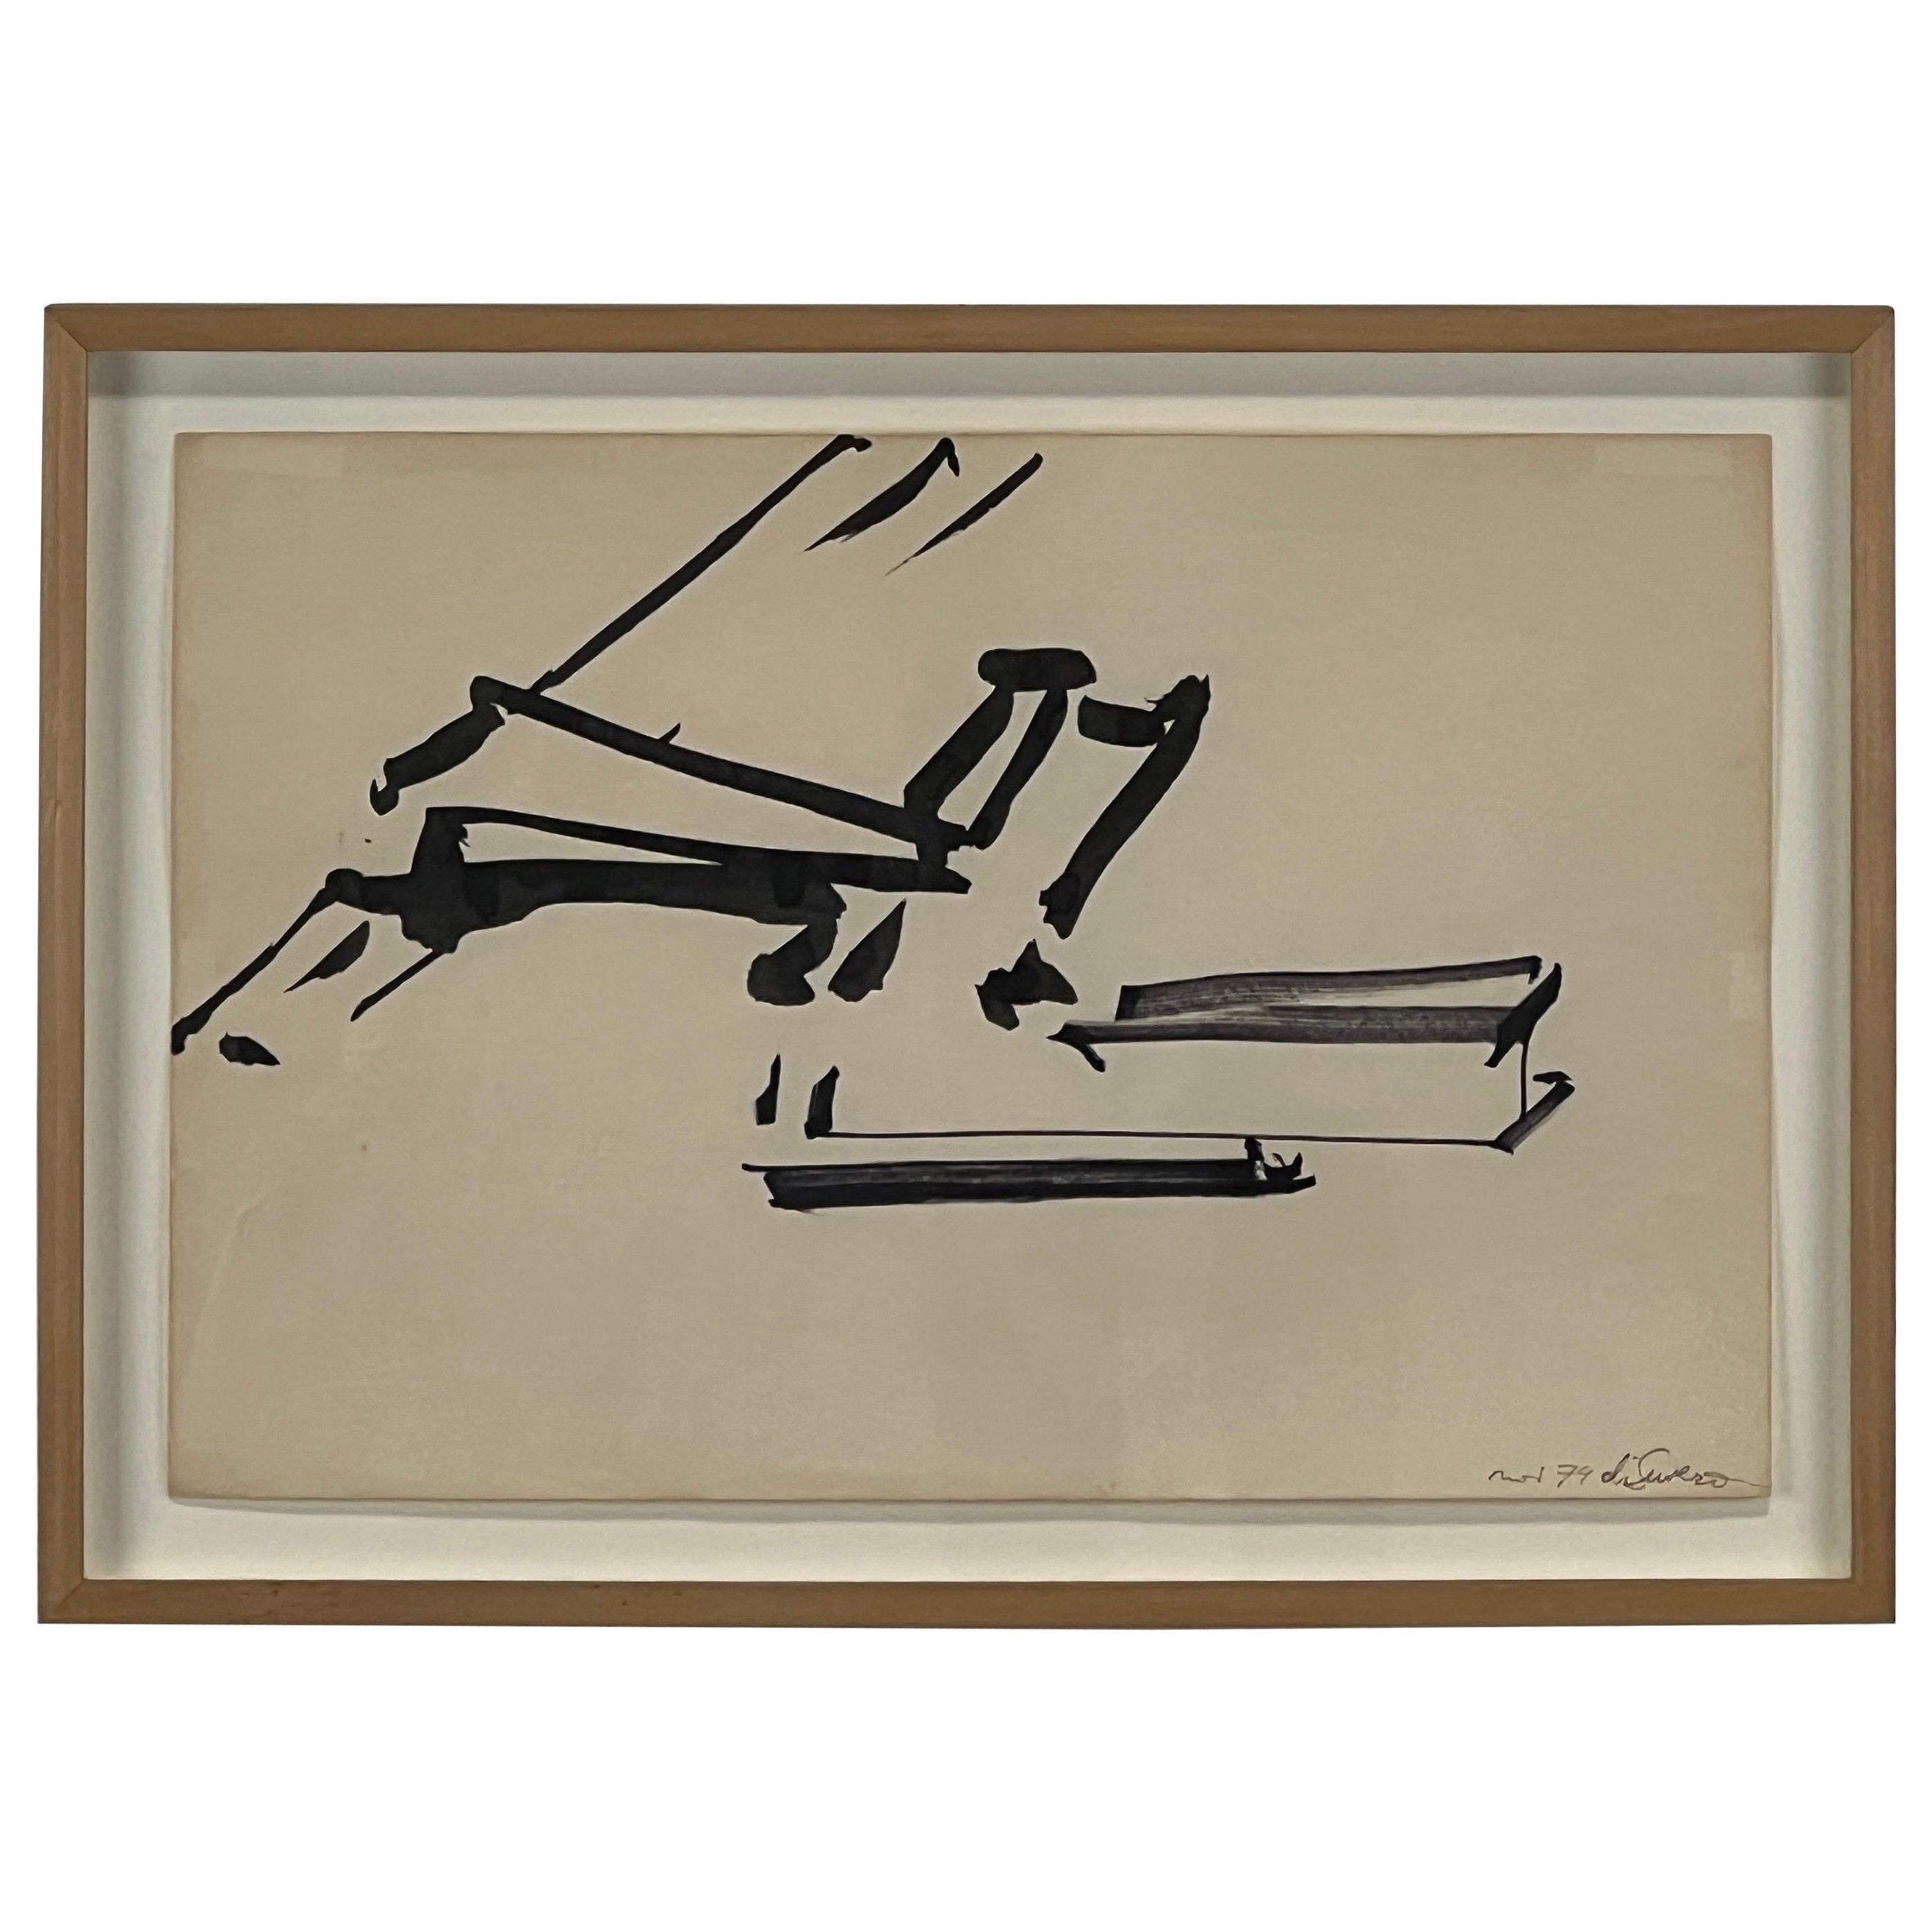 Untitled Ink Drawing on Paper, 1974, by Mark di Suvero 